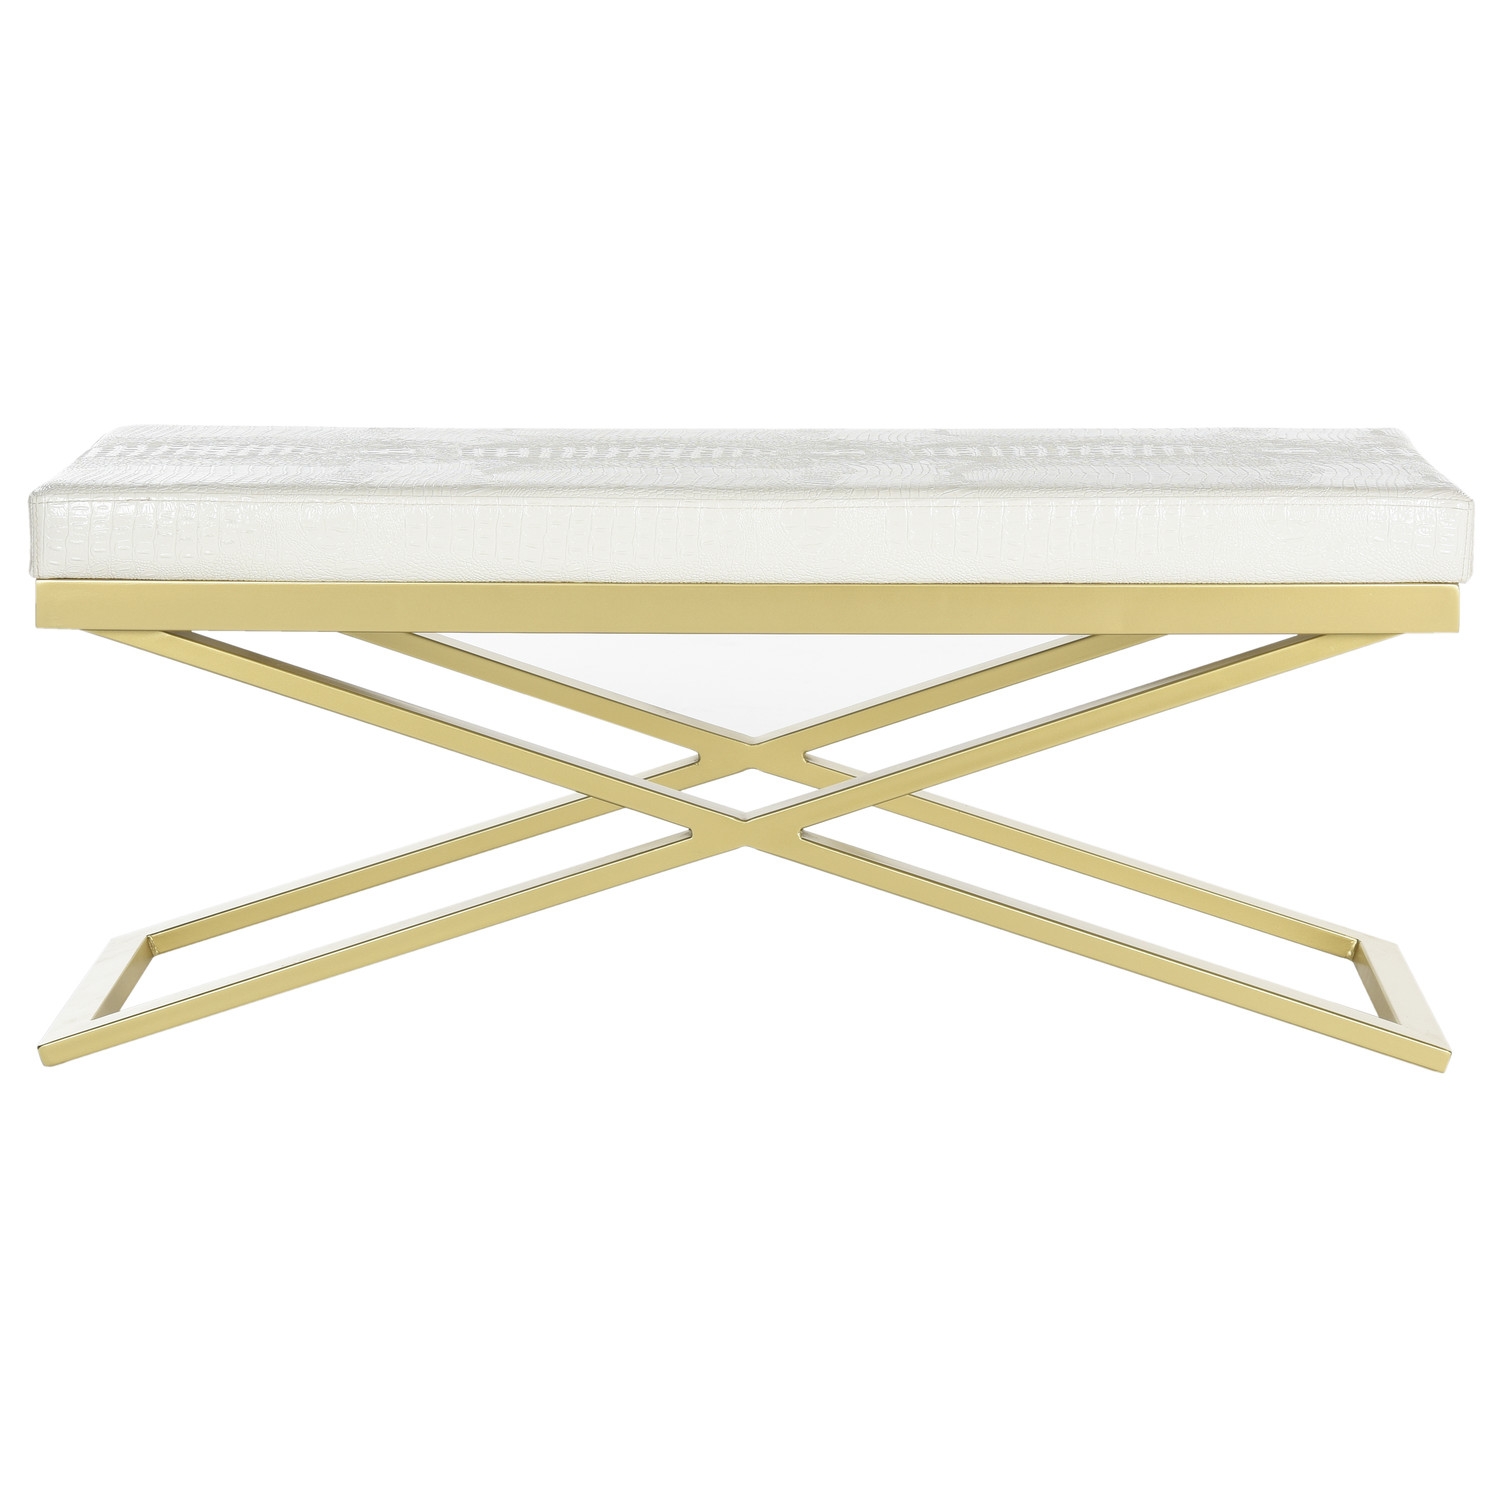 Acra Upholstered Entryway Benchby Safavieh - White Crocodile/Gold - Image 0